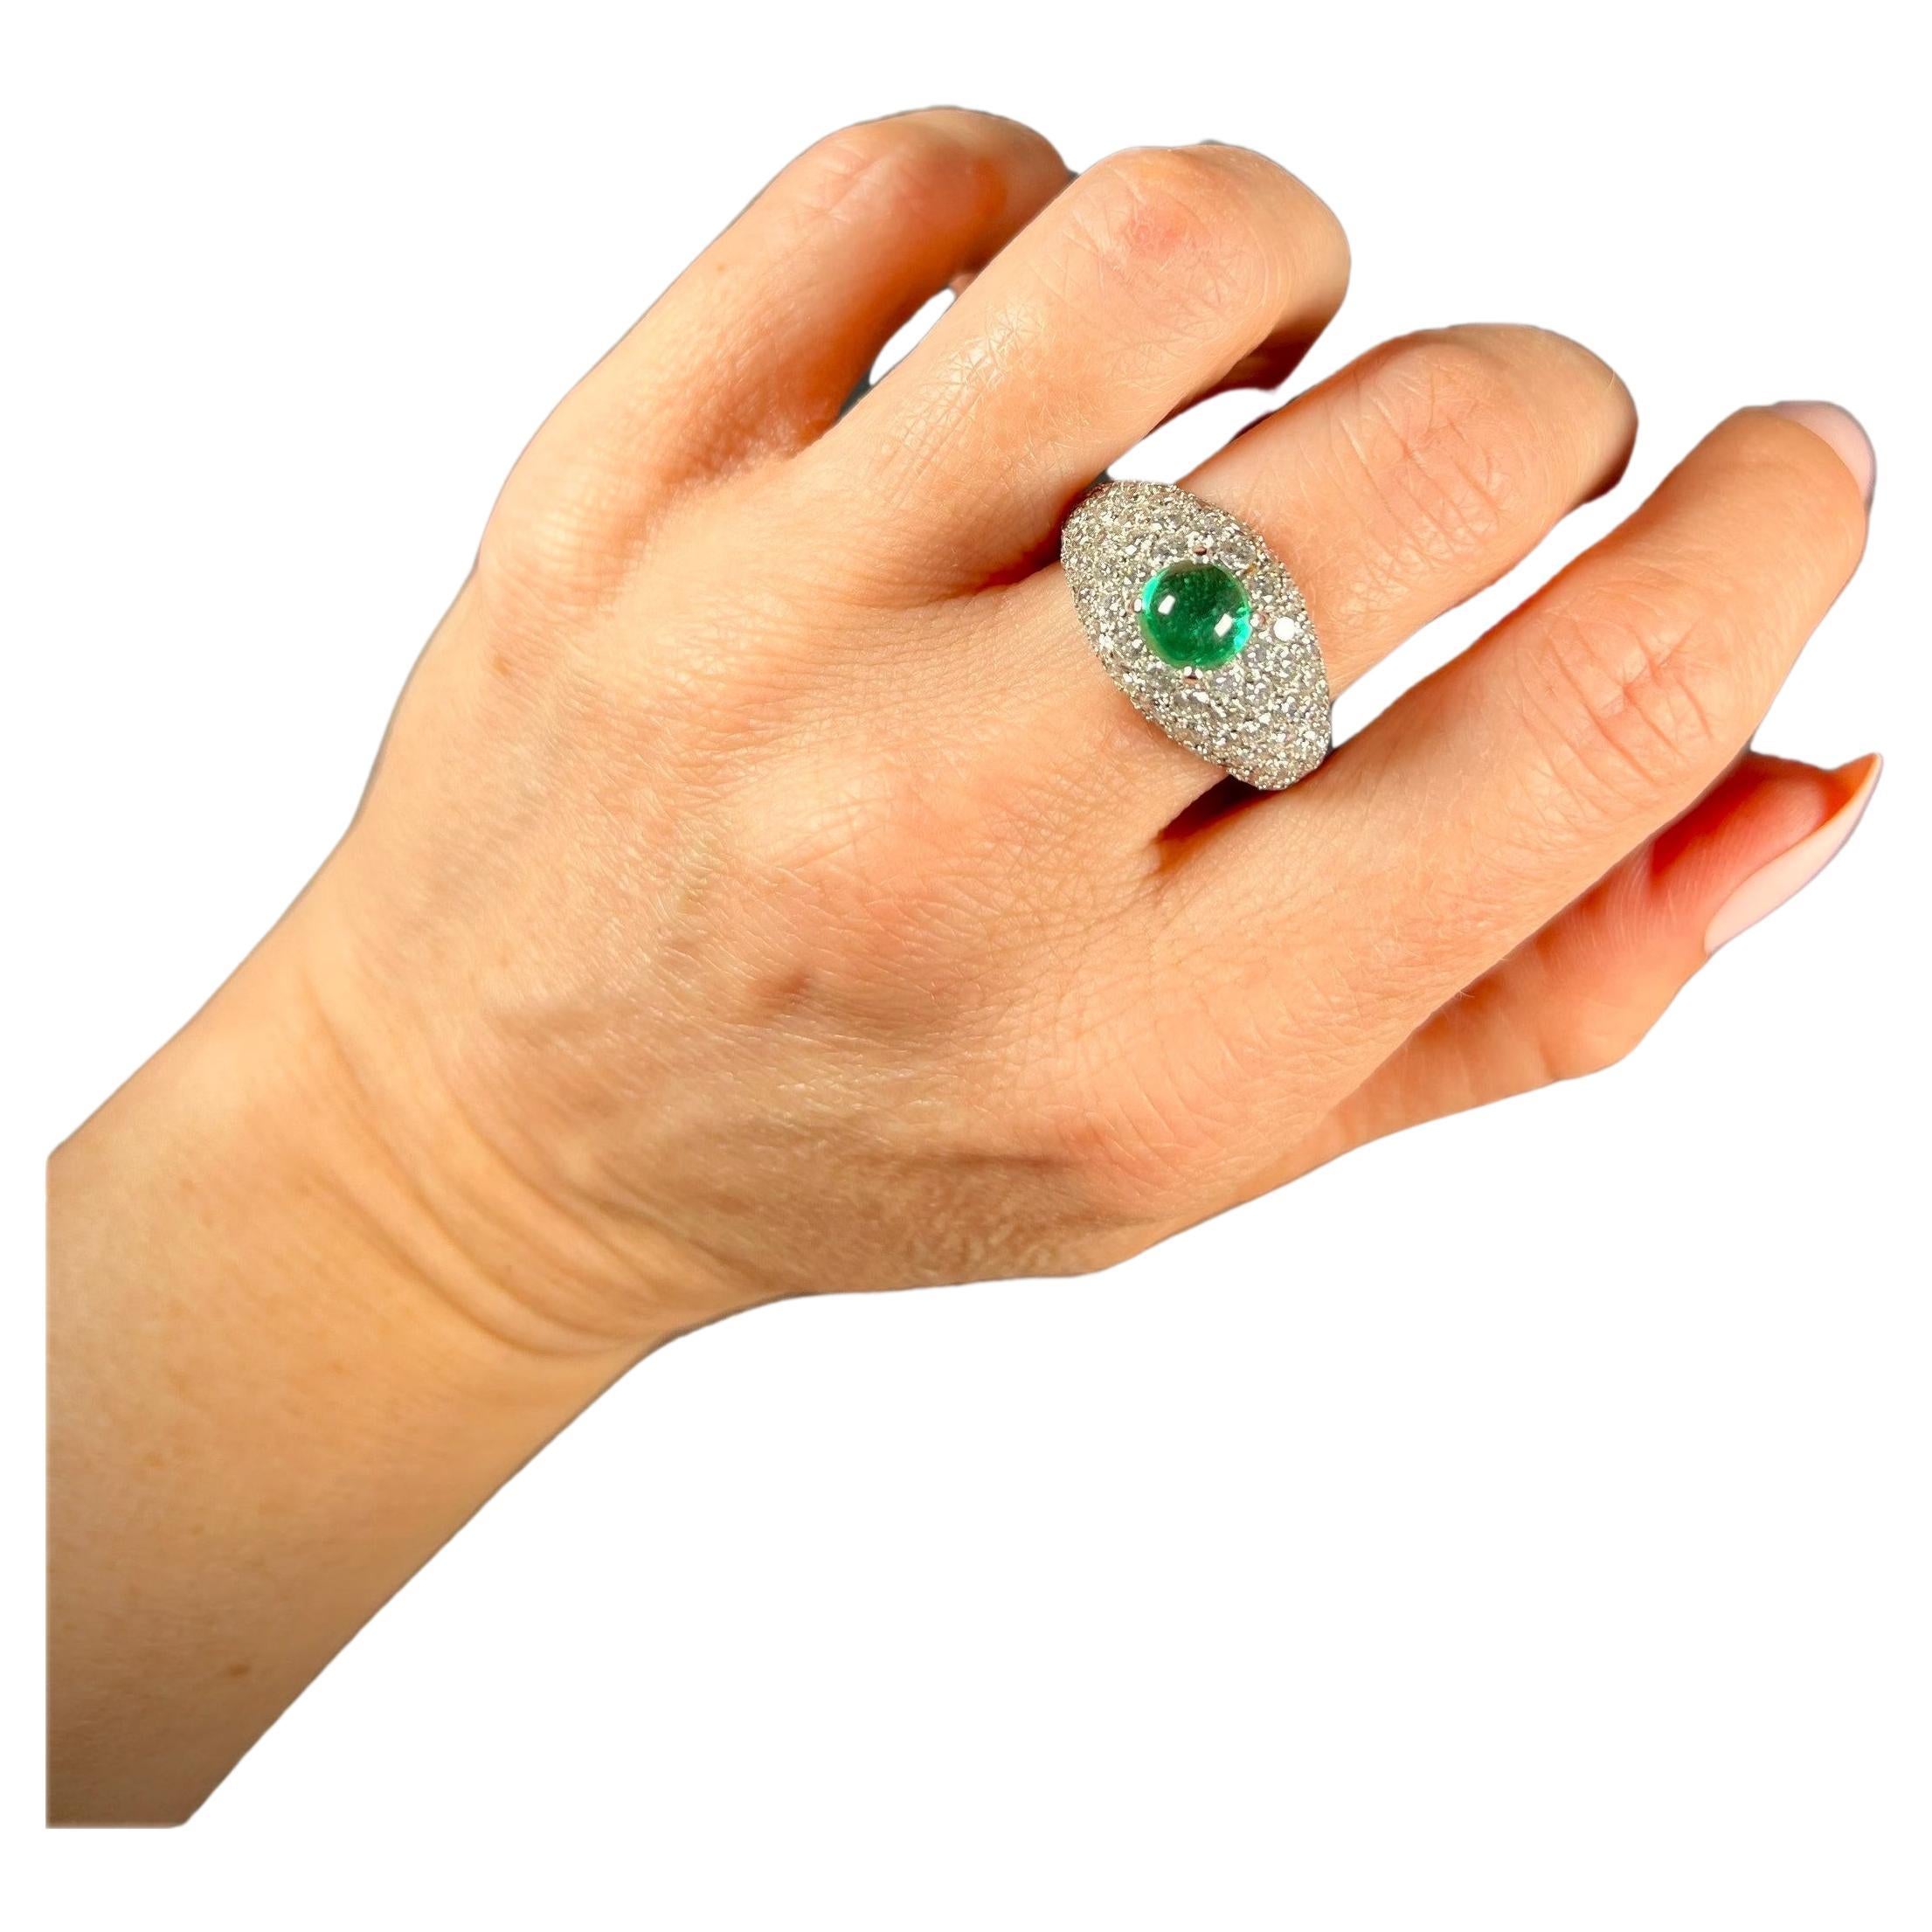 Vintage 18ct White Gold 1940’s French Emerald & Diamond Bombe Ring